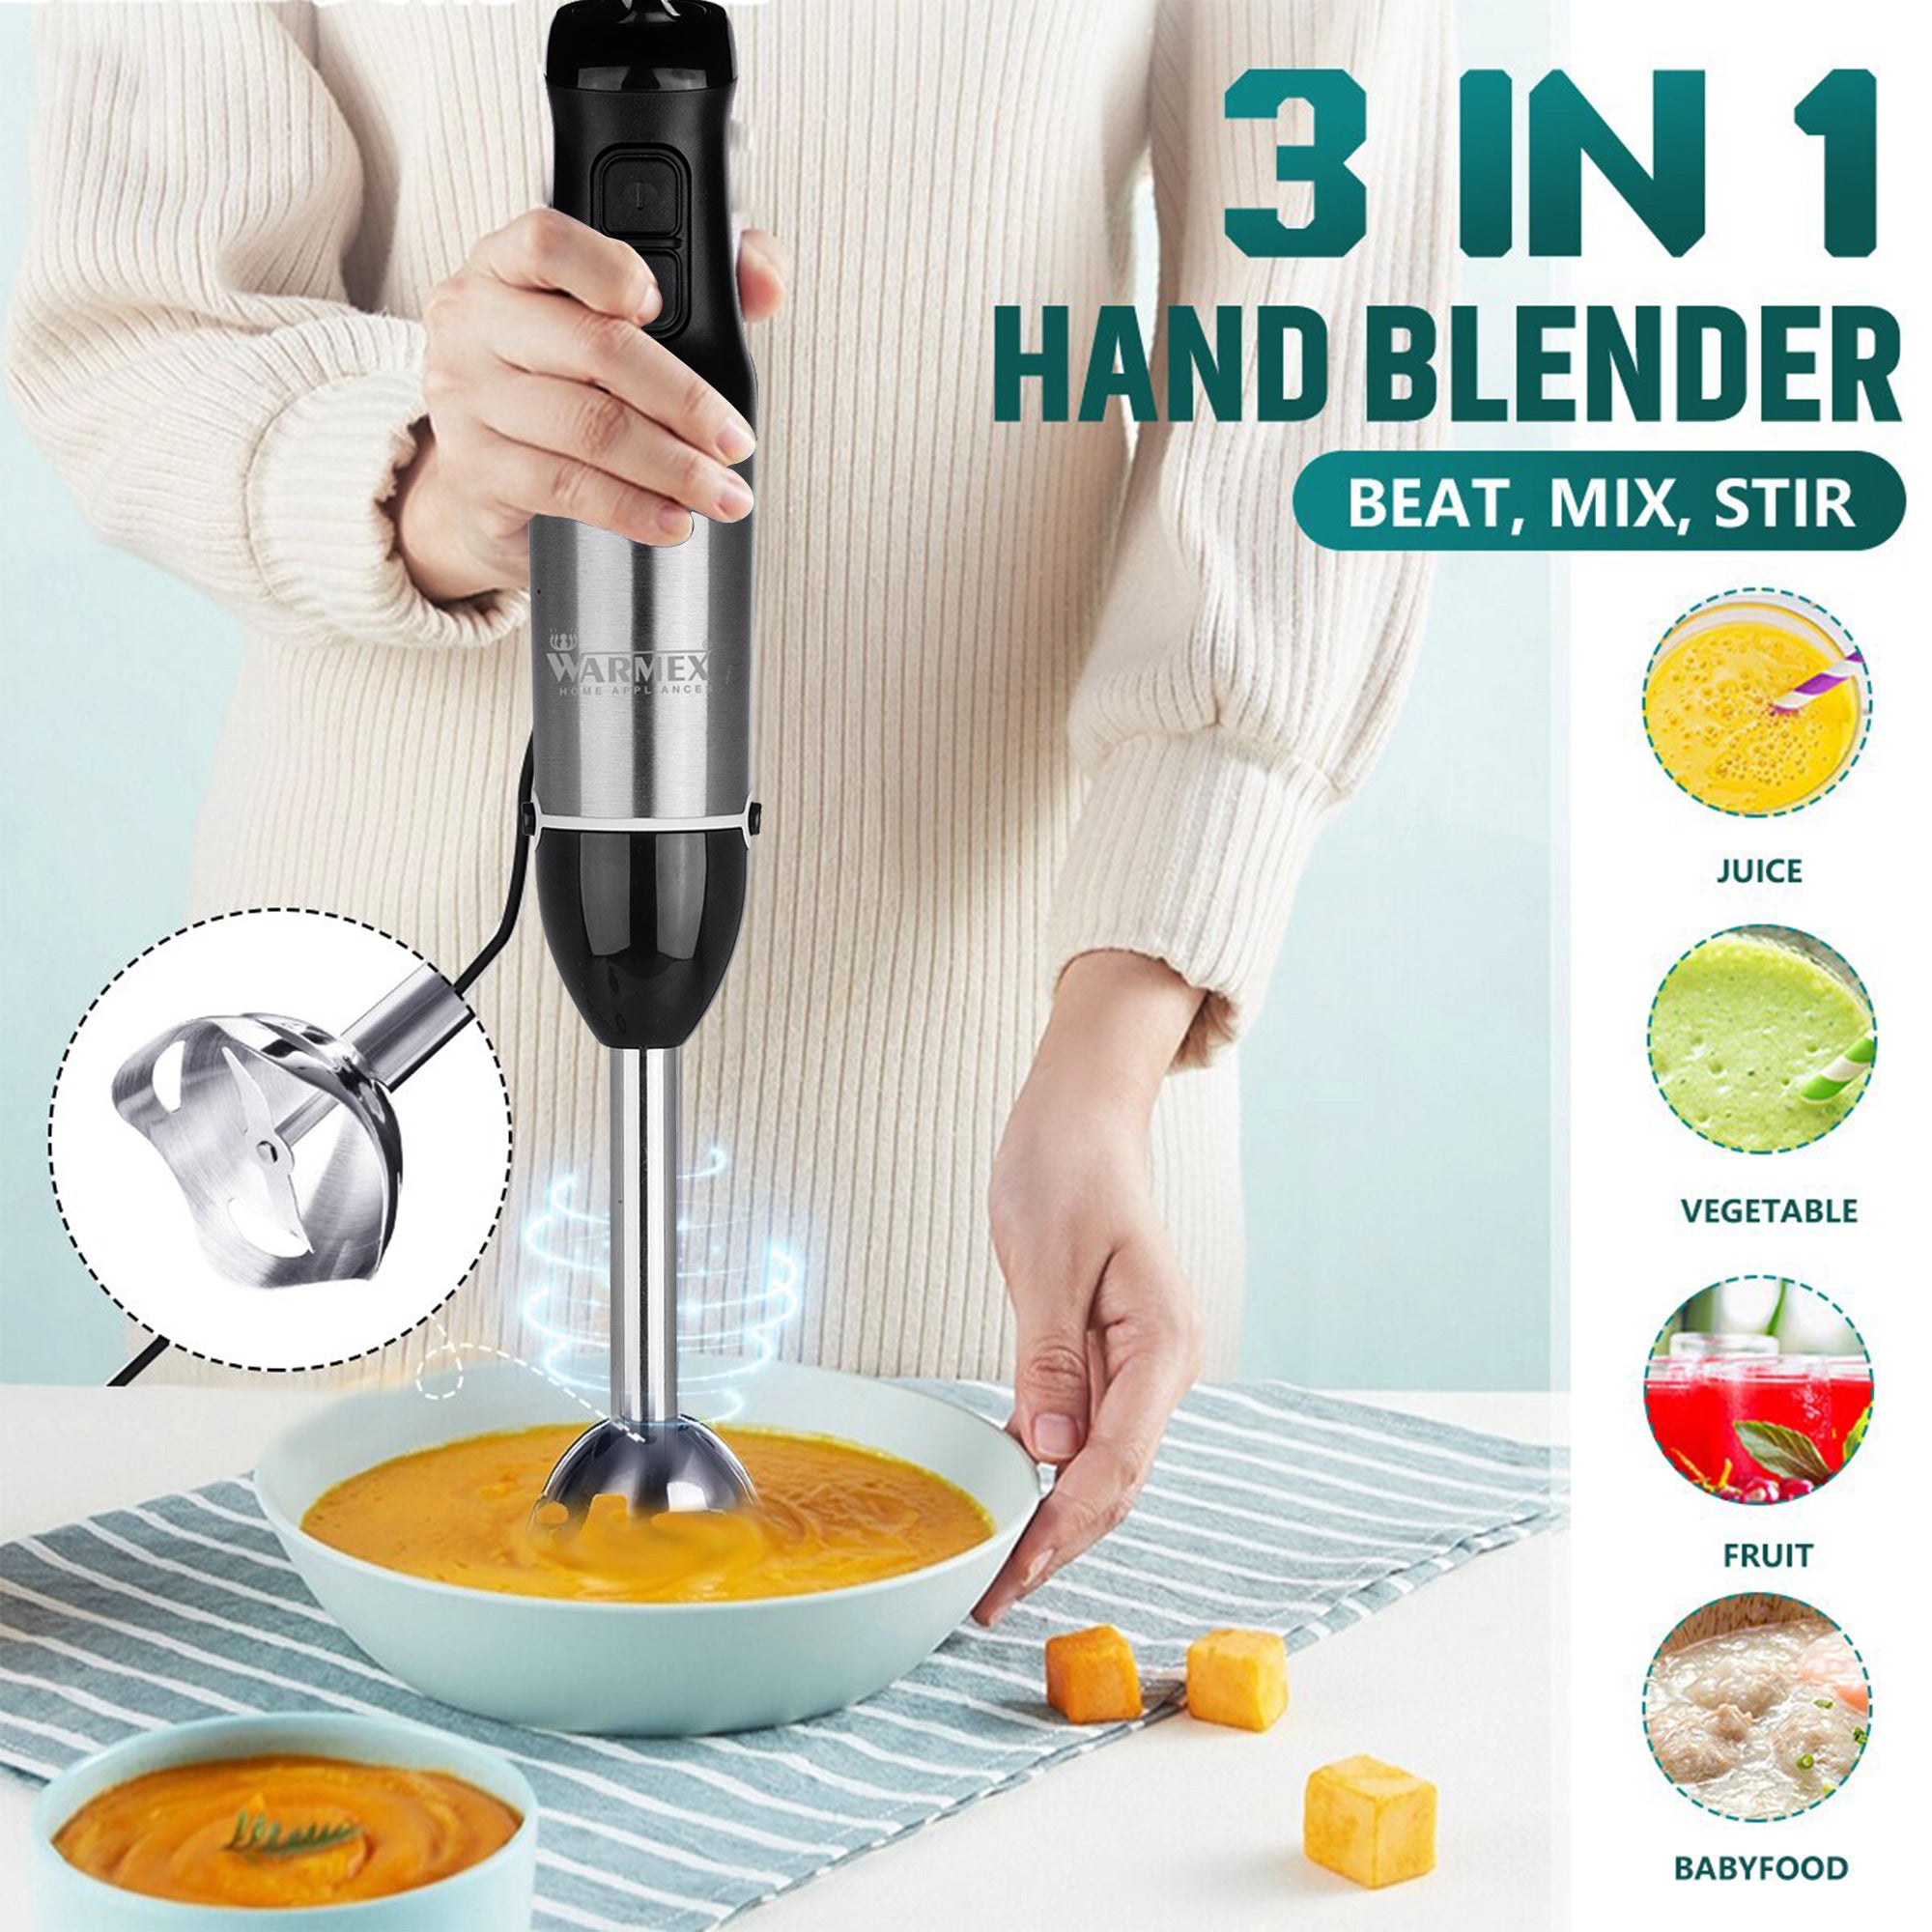 Warmex 800 Watts Electric Hand Blender with 500/600 ML Capacity